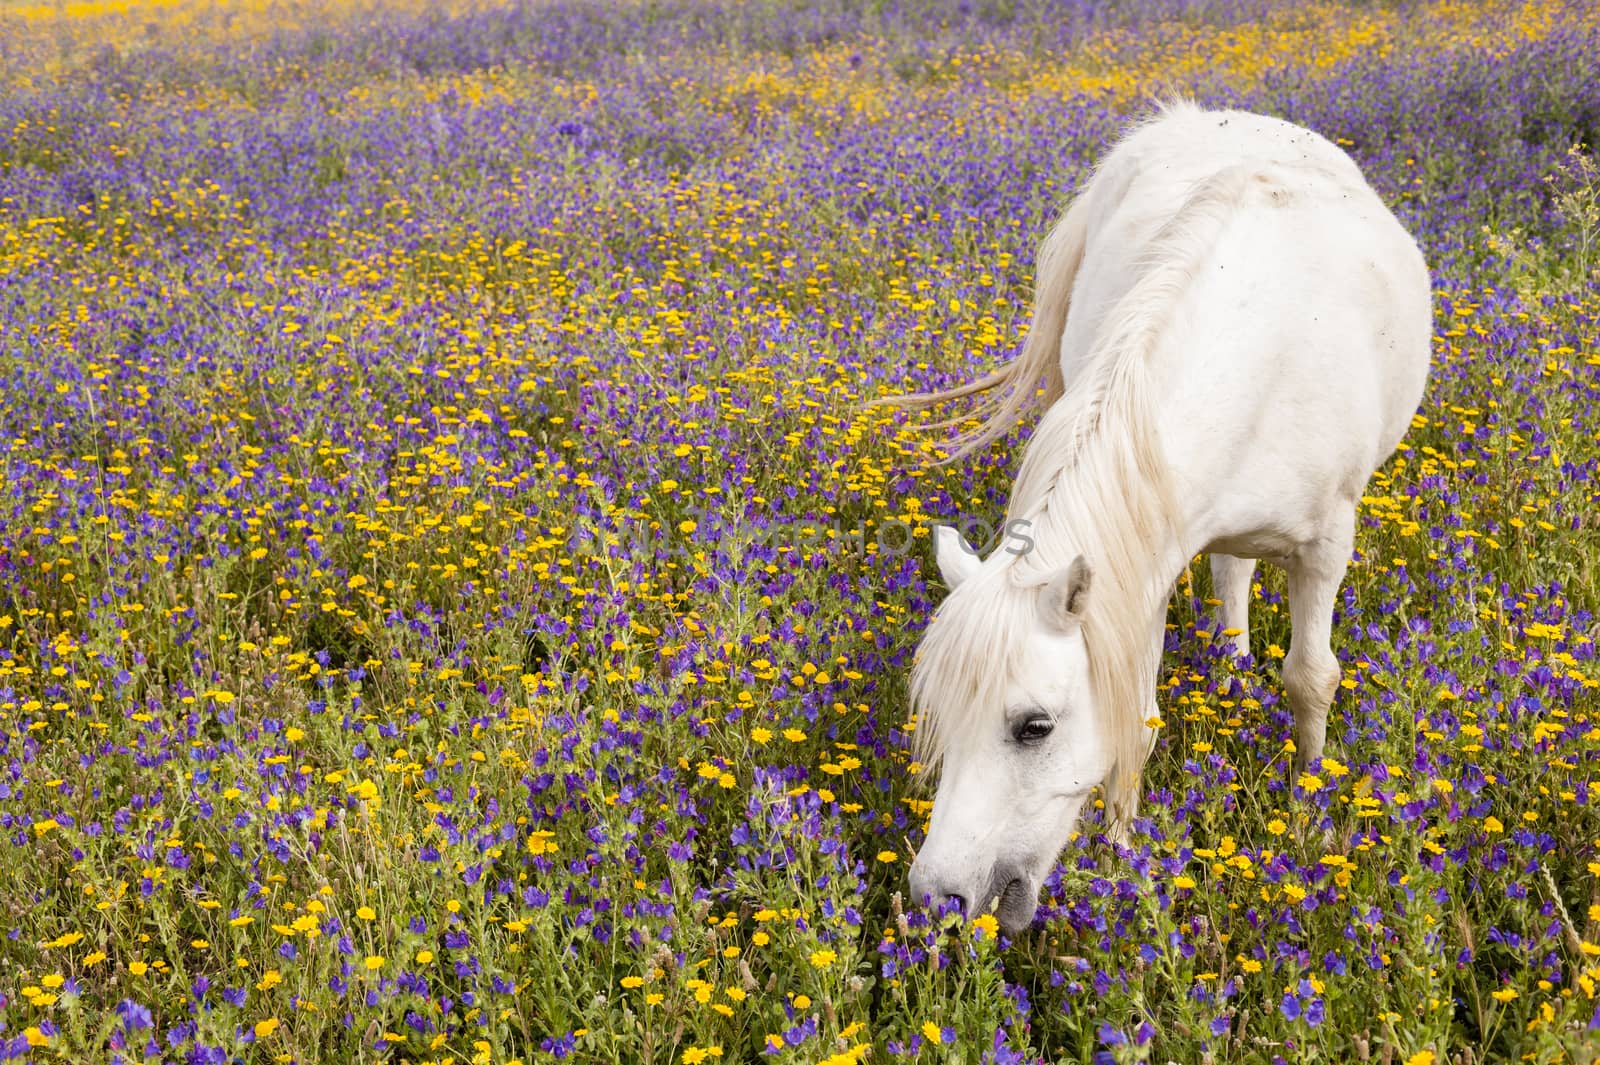 White horse grazing flowers on a field